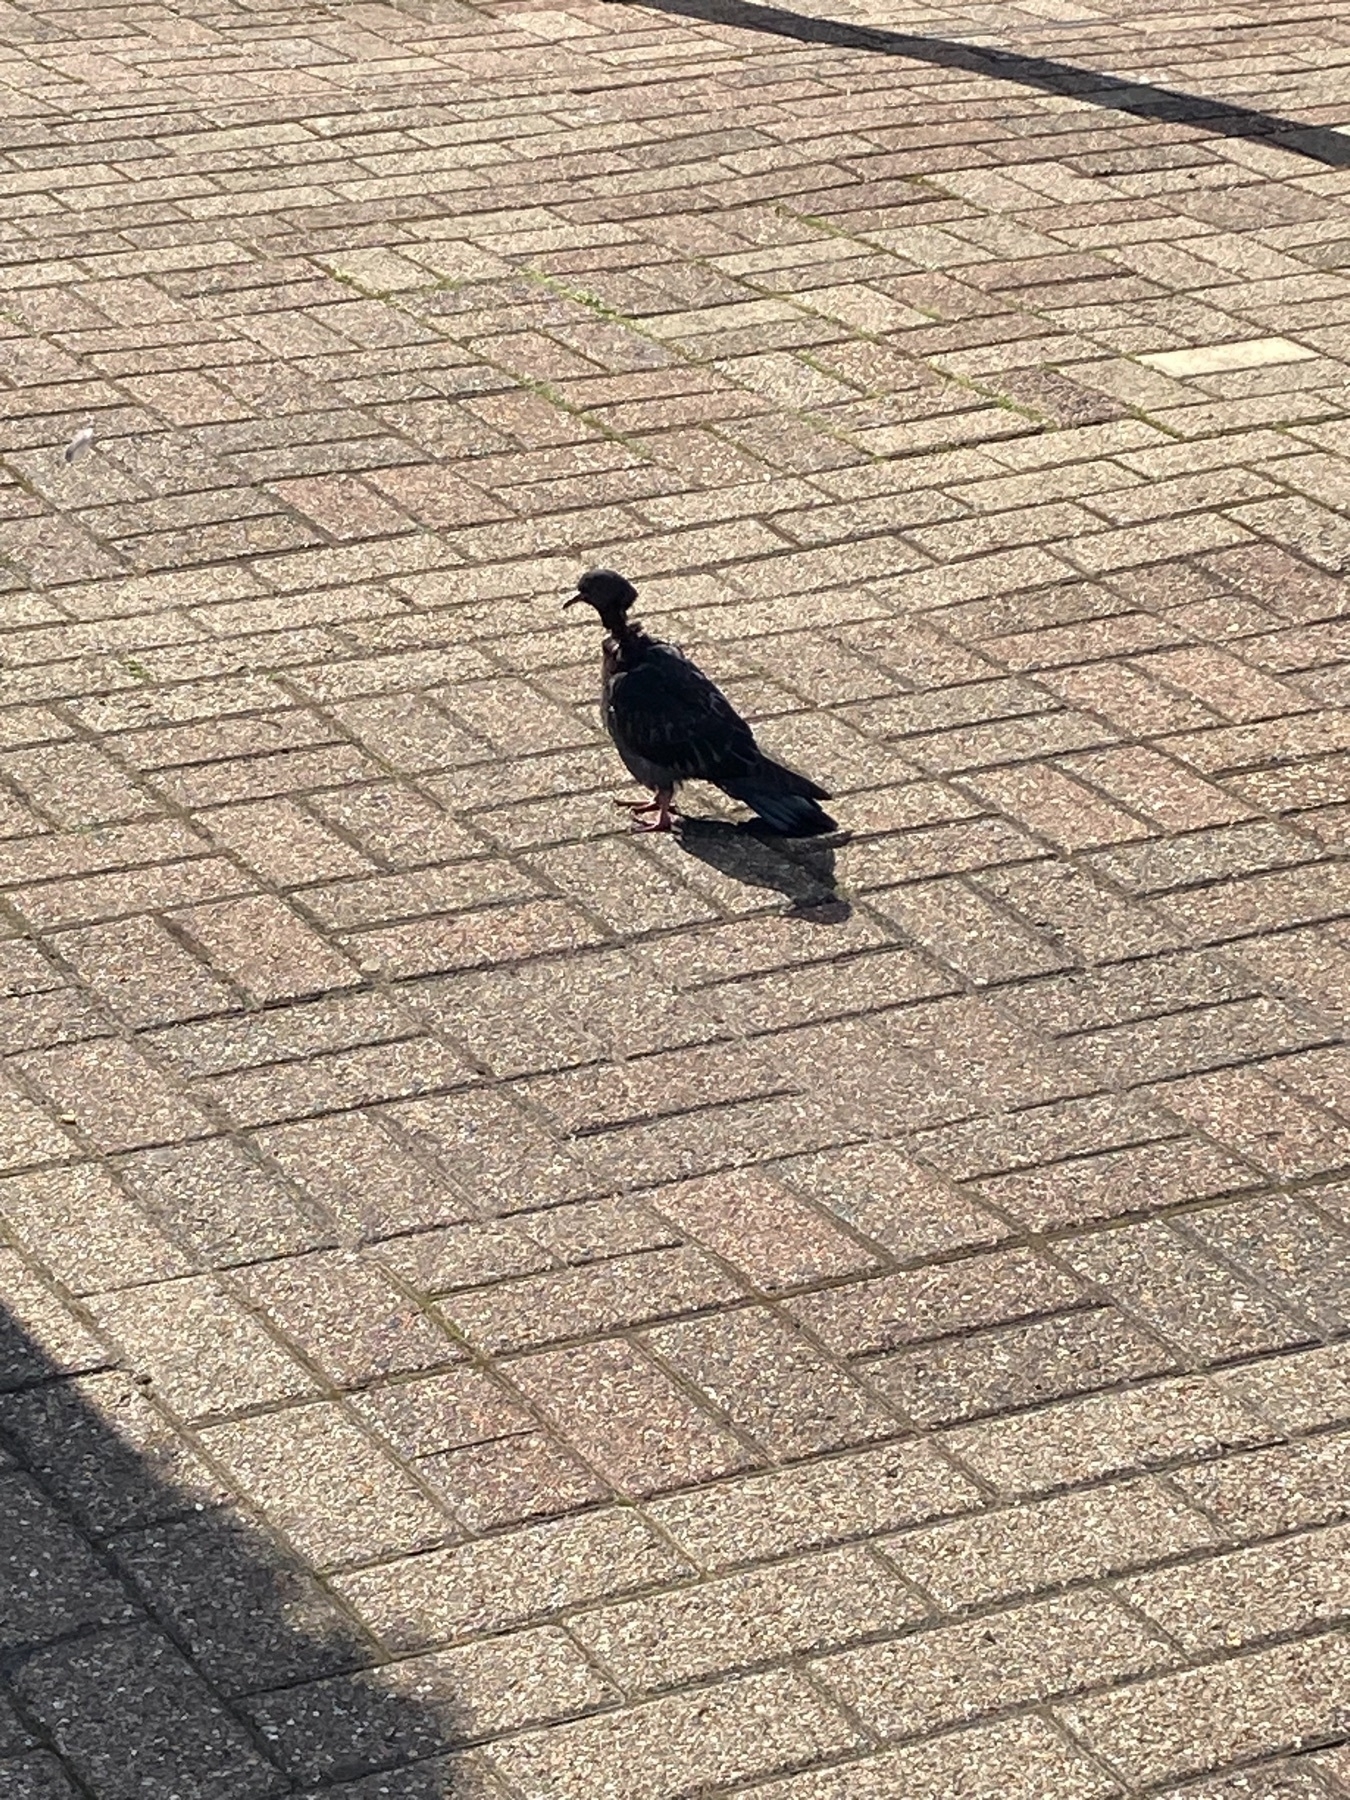 A young pigeon with a serious and probably life-threatening neck injury